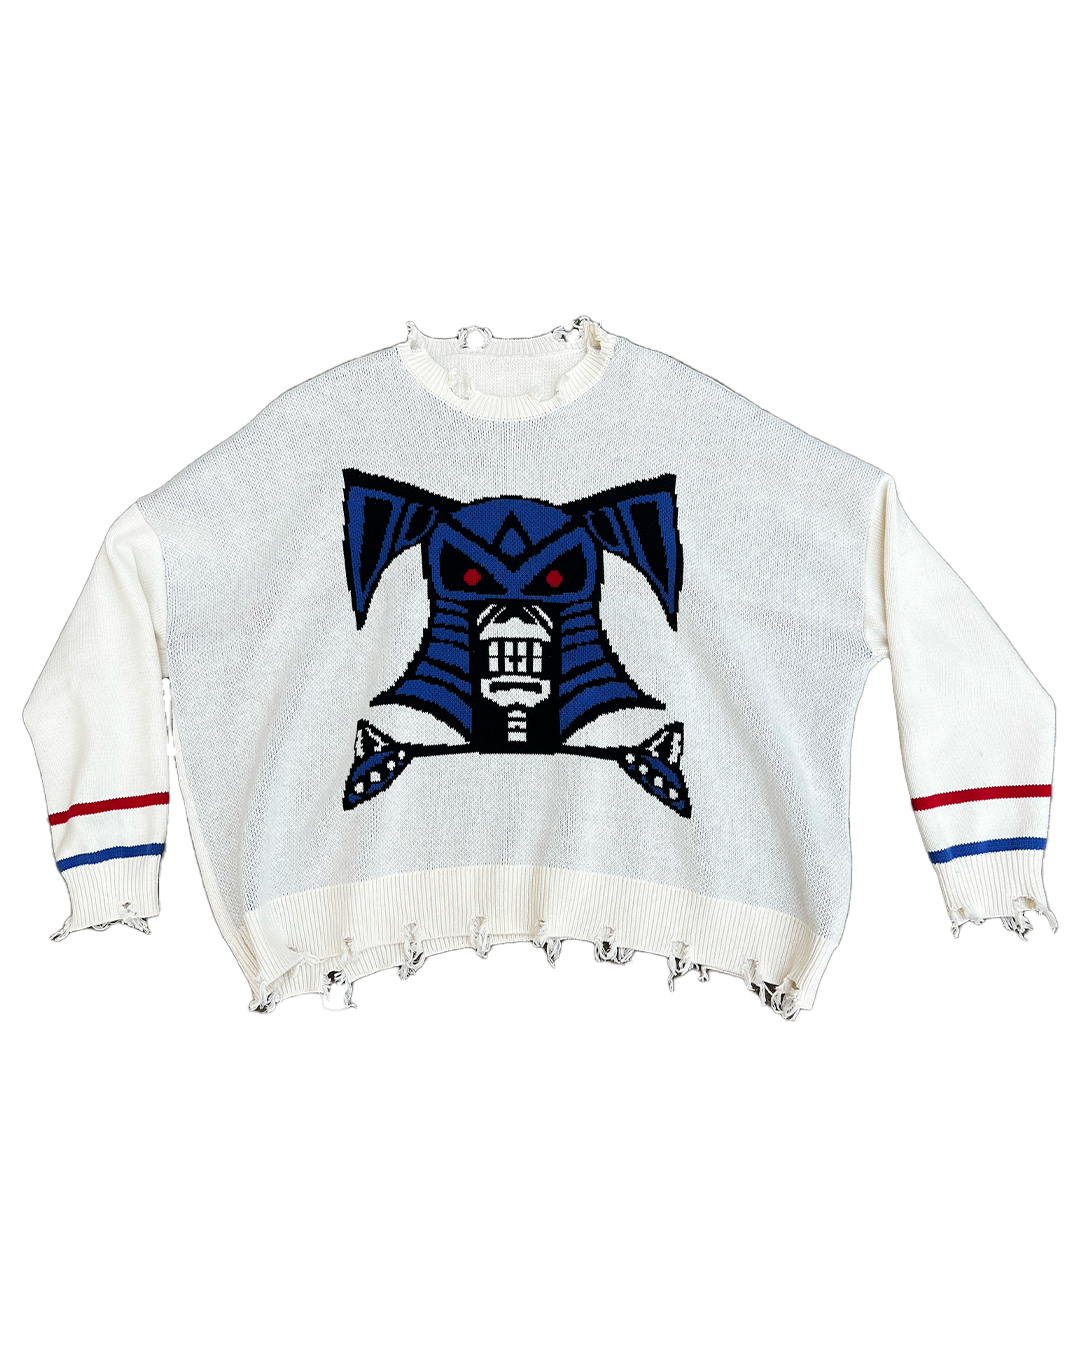 METAL SOLDIER OVERSIZED SWEATER